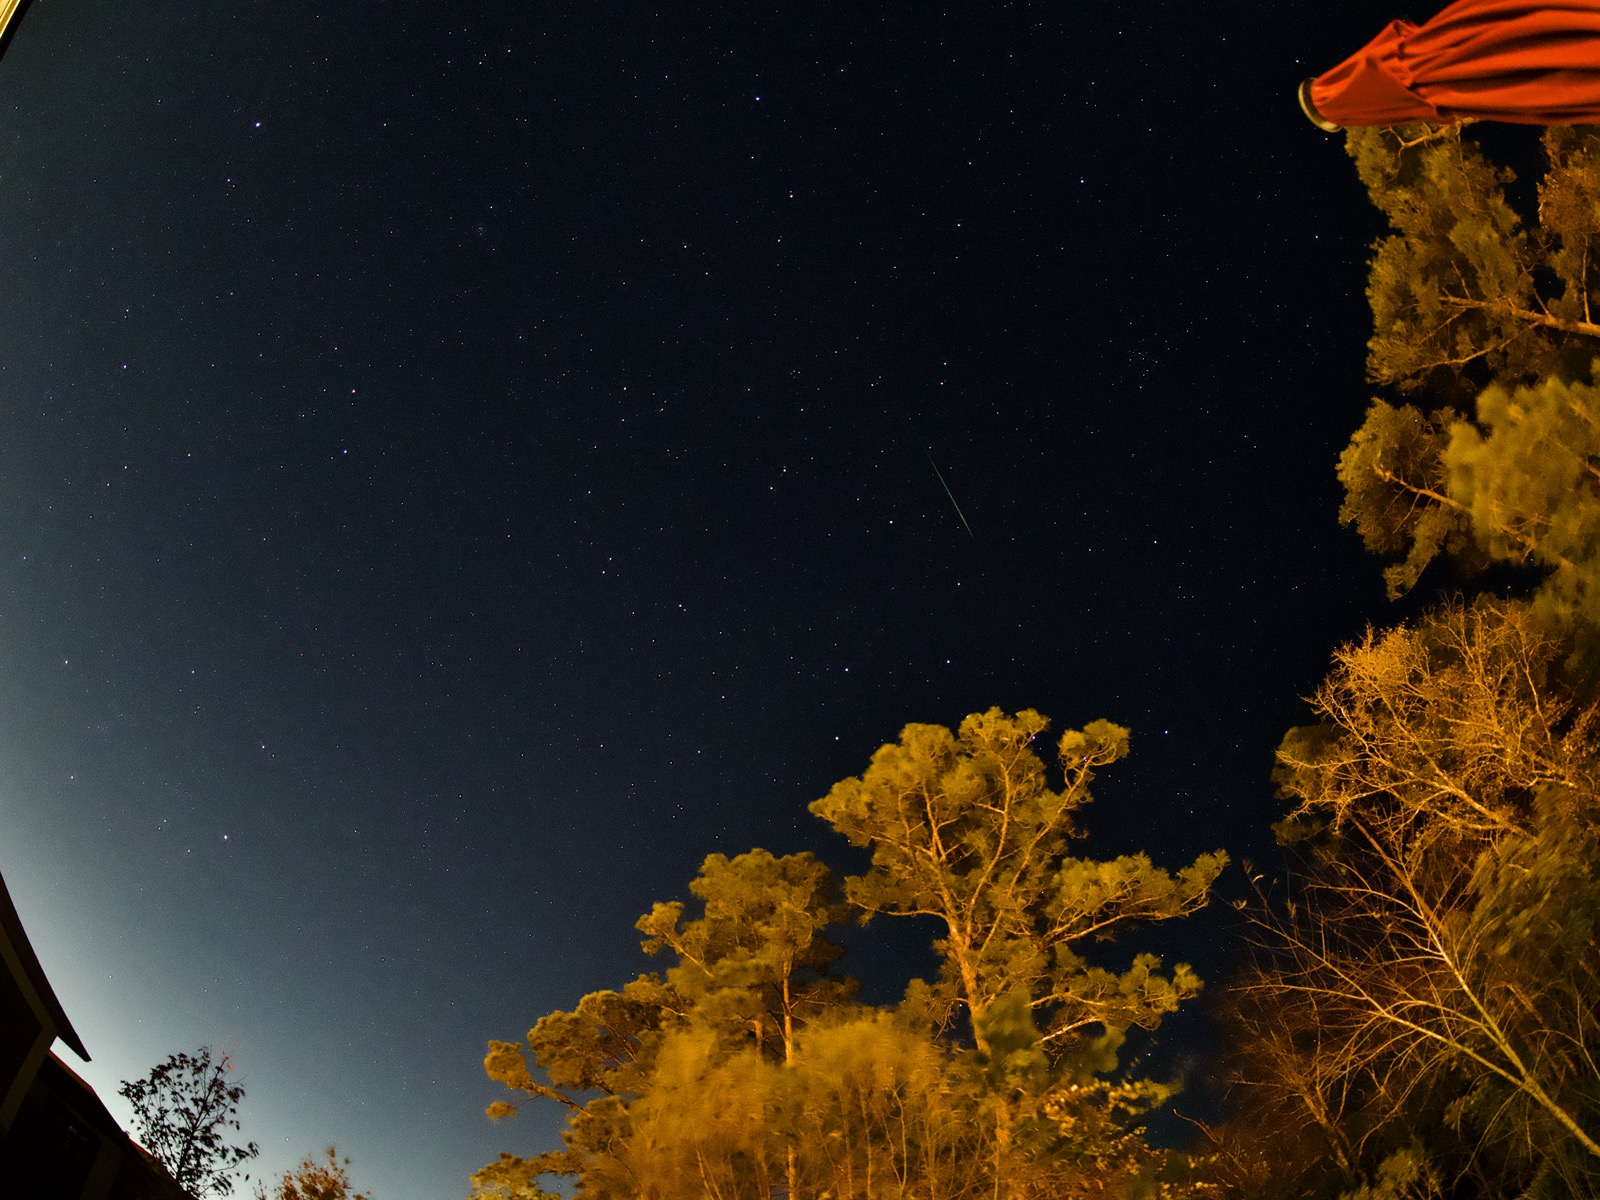 Fisheye view of the stars in the night sky with a meteor streak  toward mid-frame in the upper right.